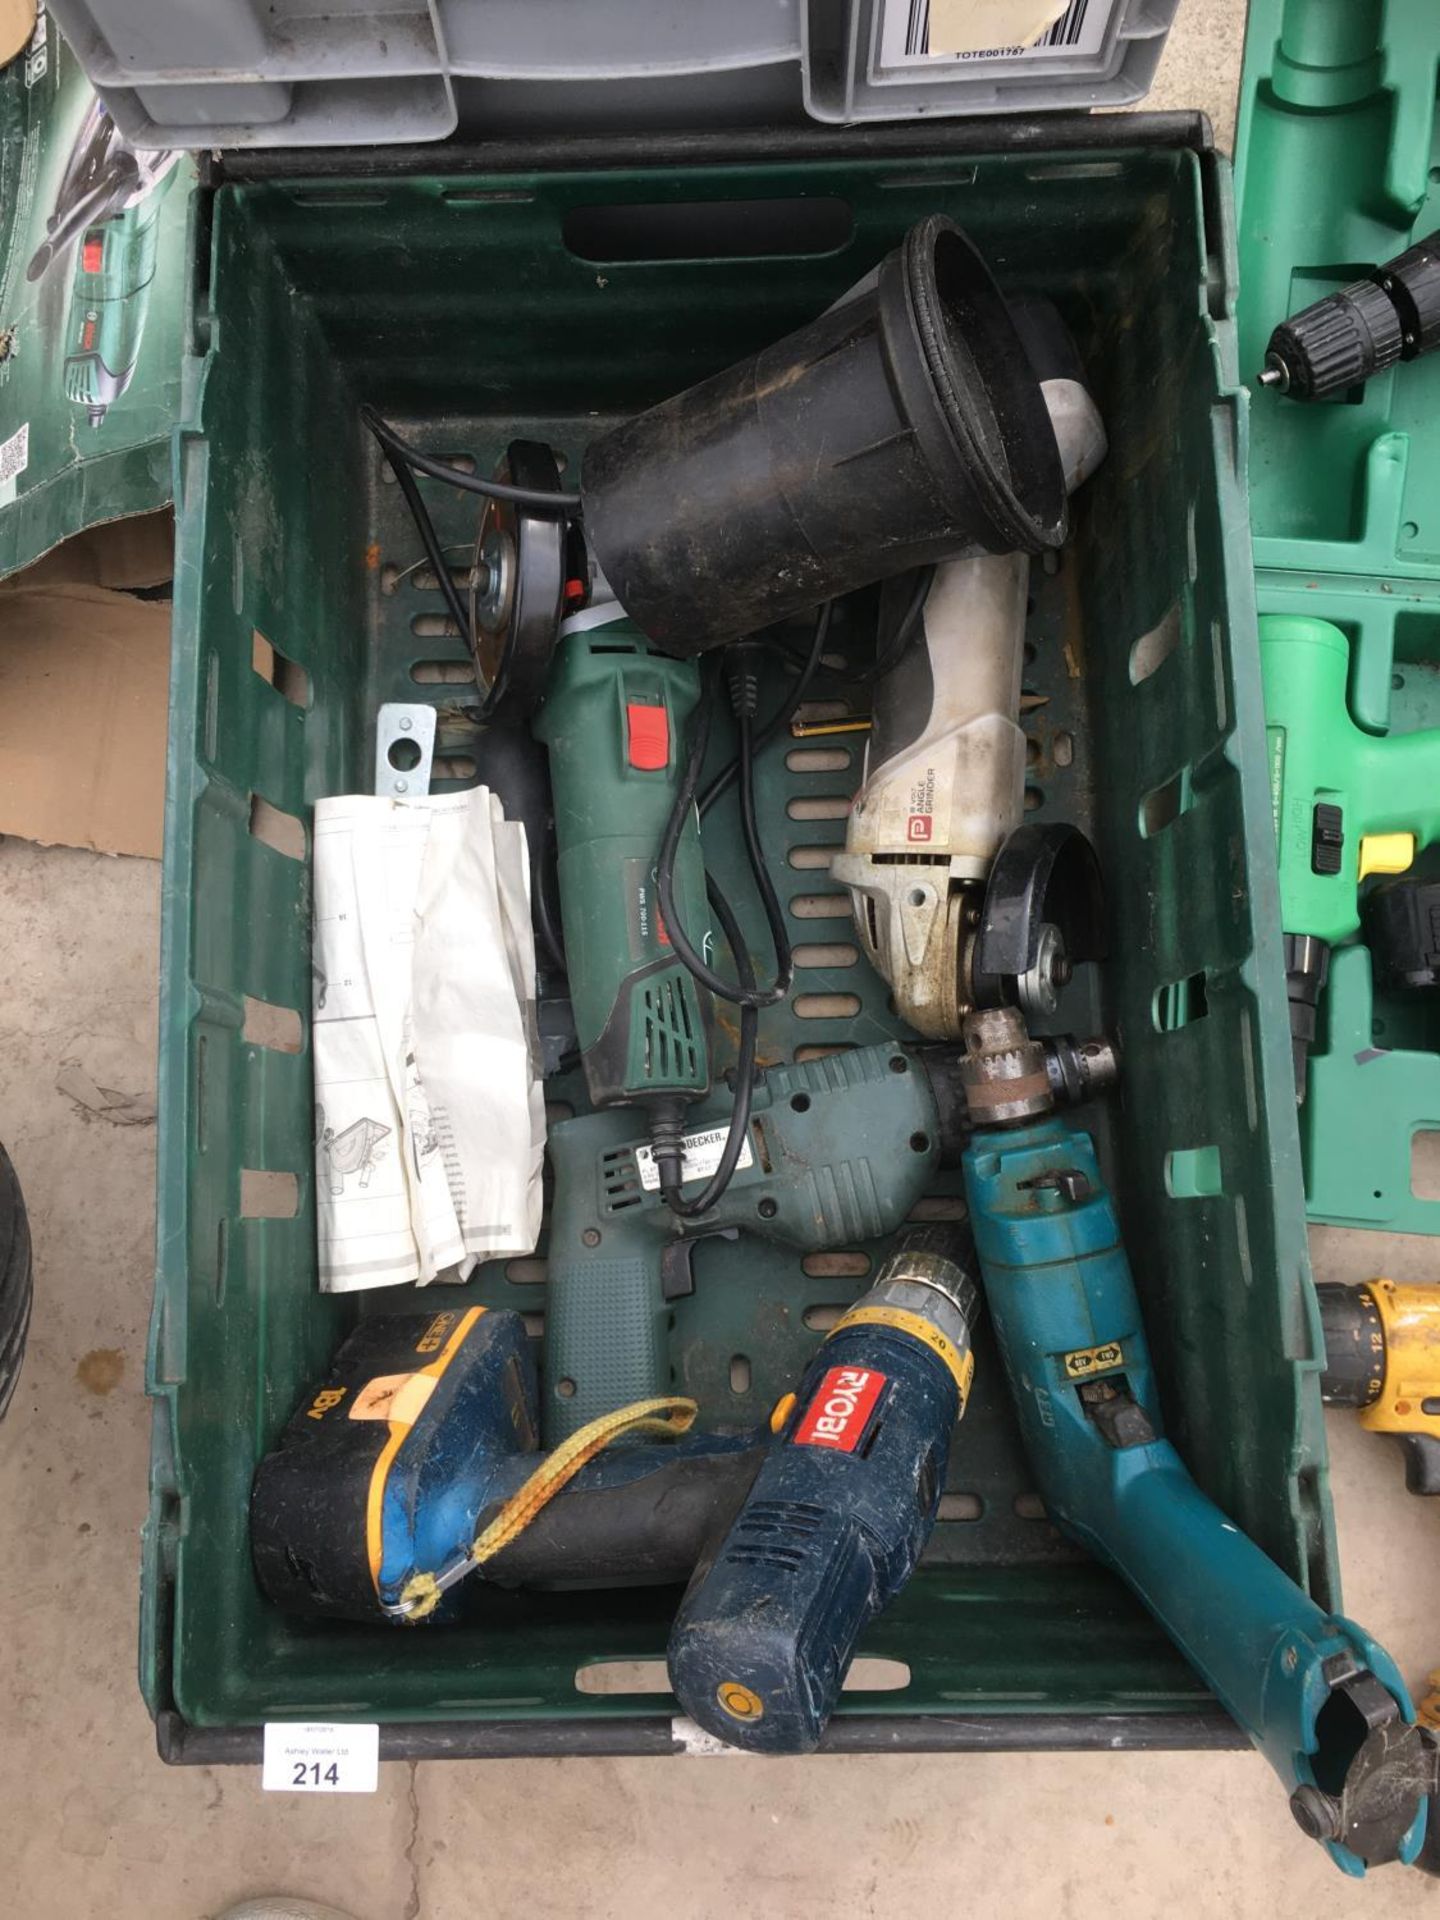 A LARGE COLLECTION OF POWER TOOLS TO INCLUDE DRILLS, SAWS, ANGLE GRINDERS, SPARE BATTERIES ETC ETC - Image 2 of 4